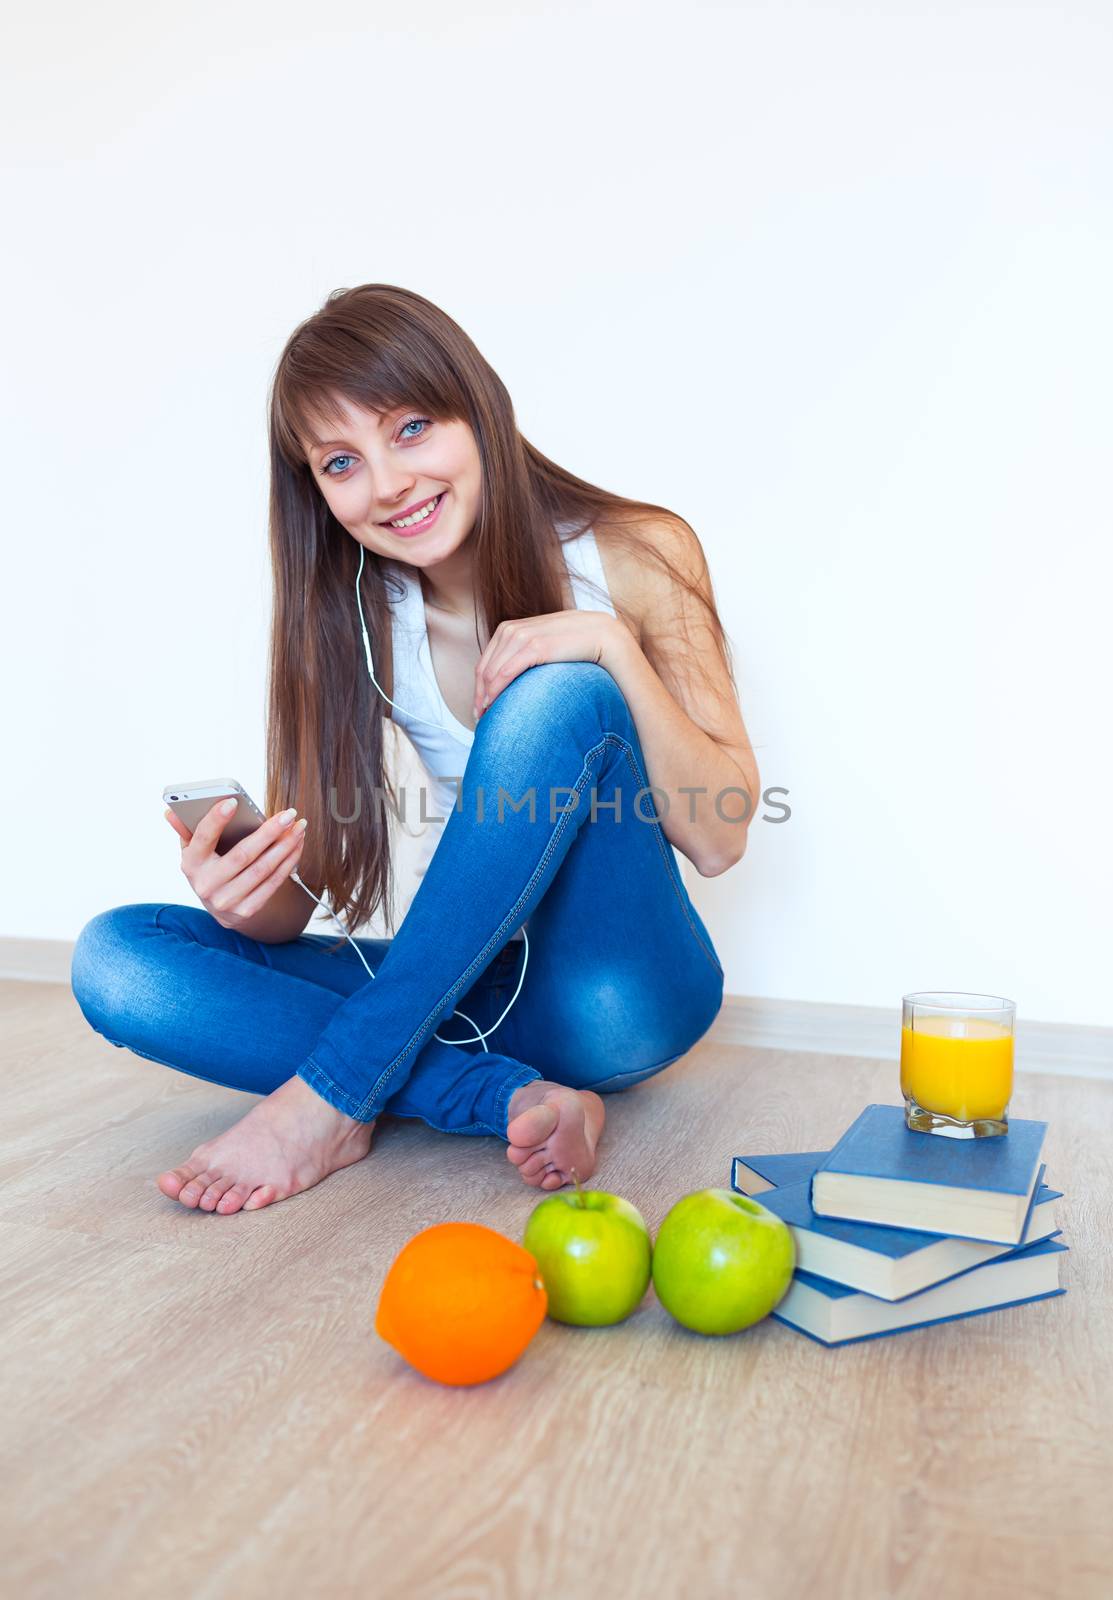 Portrait of a young woman with headphones and green apple listen by vlad_star